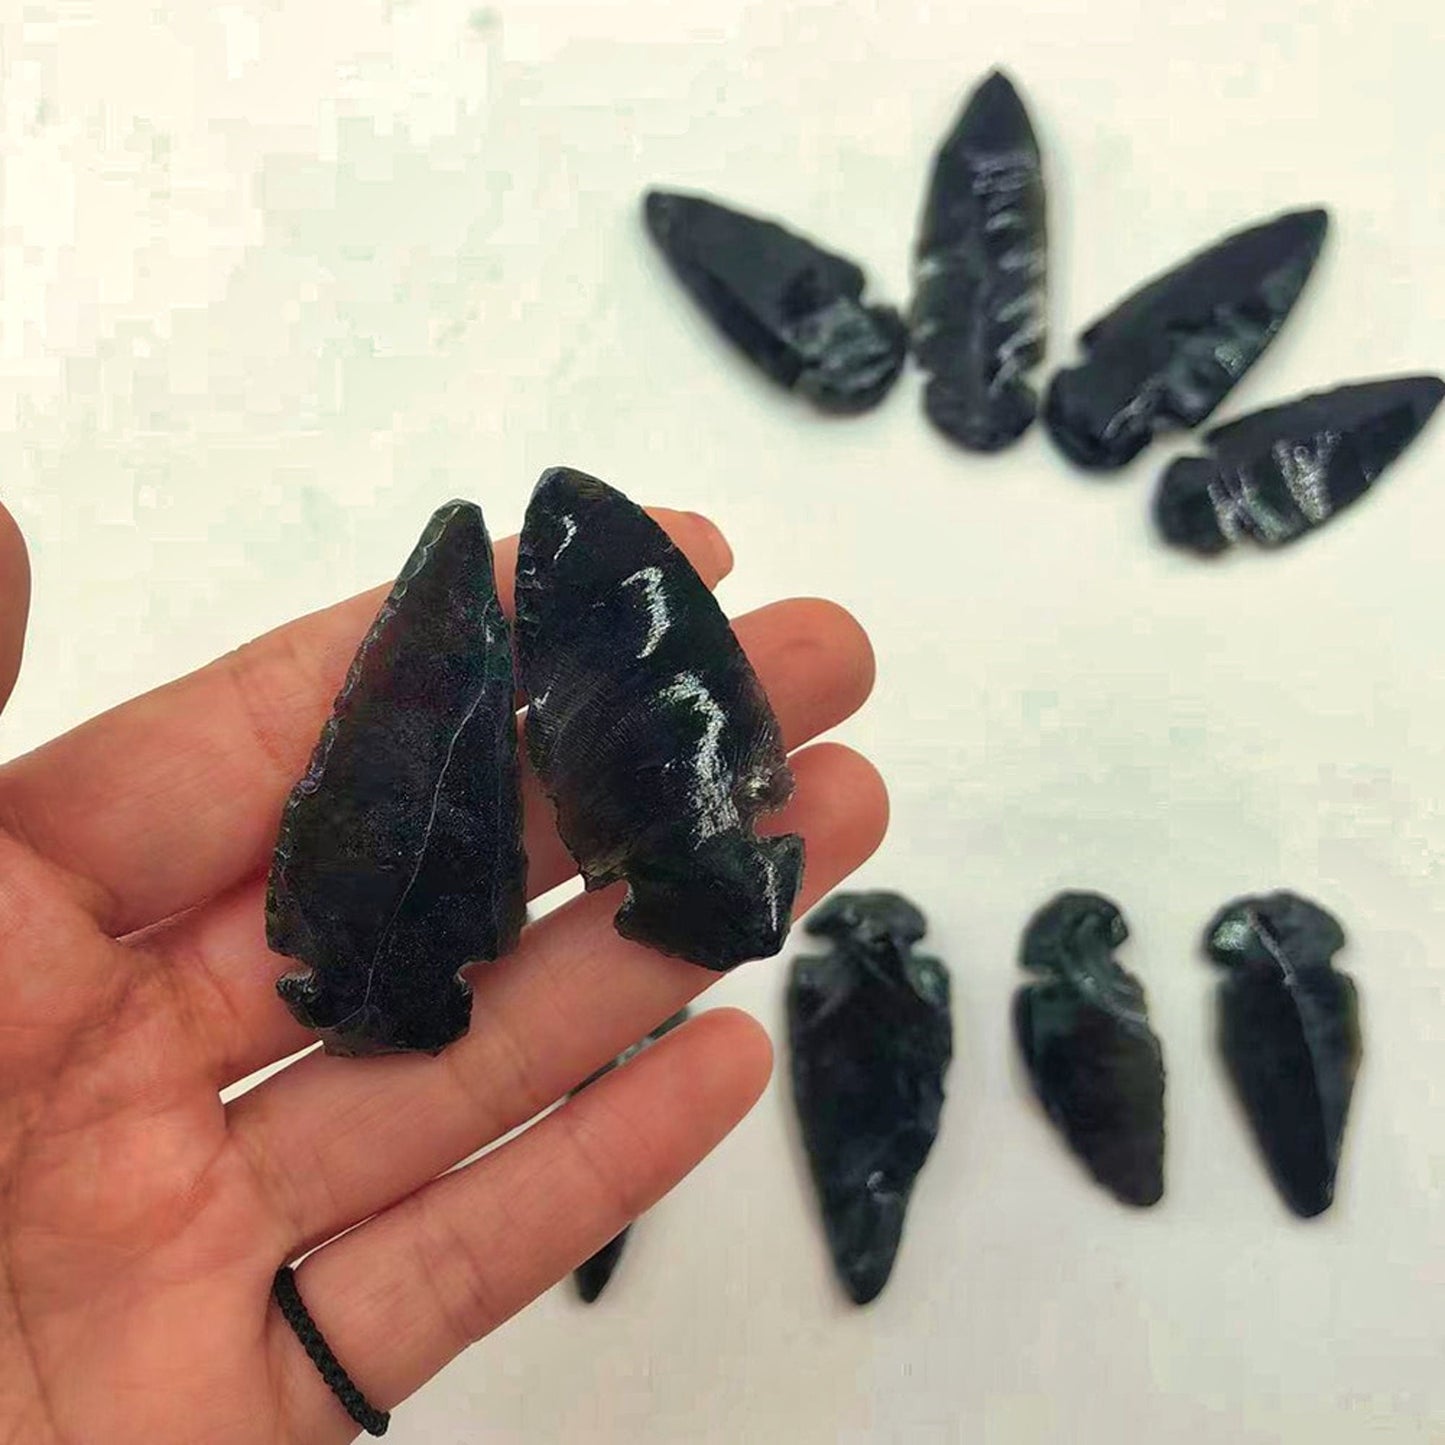 Natural Black Obsidian Carved Arrowheads Indian Style Replica Arrow Head Healing Crystals Specimen Collection DIY Jewelry Making